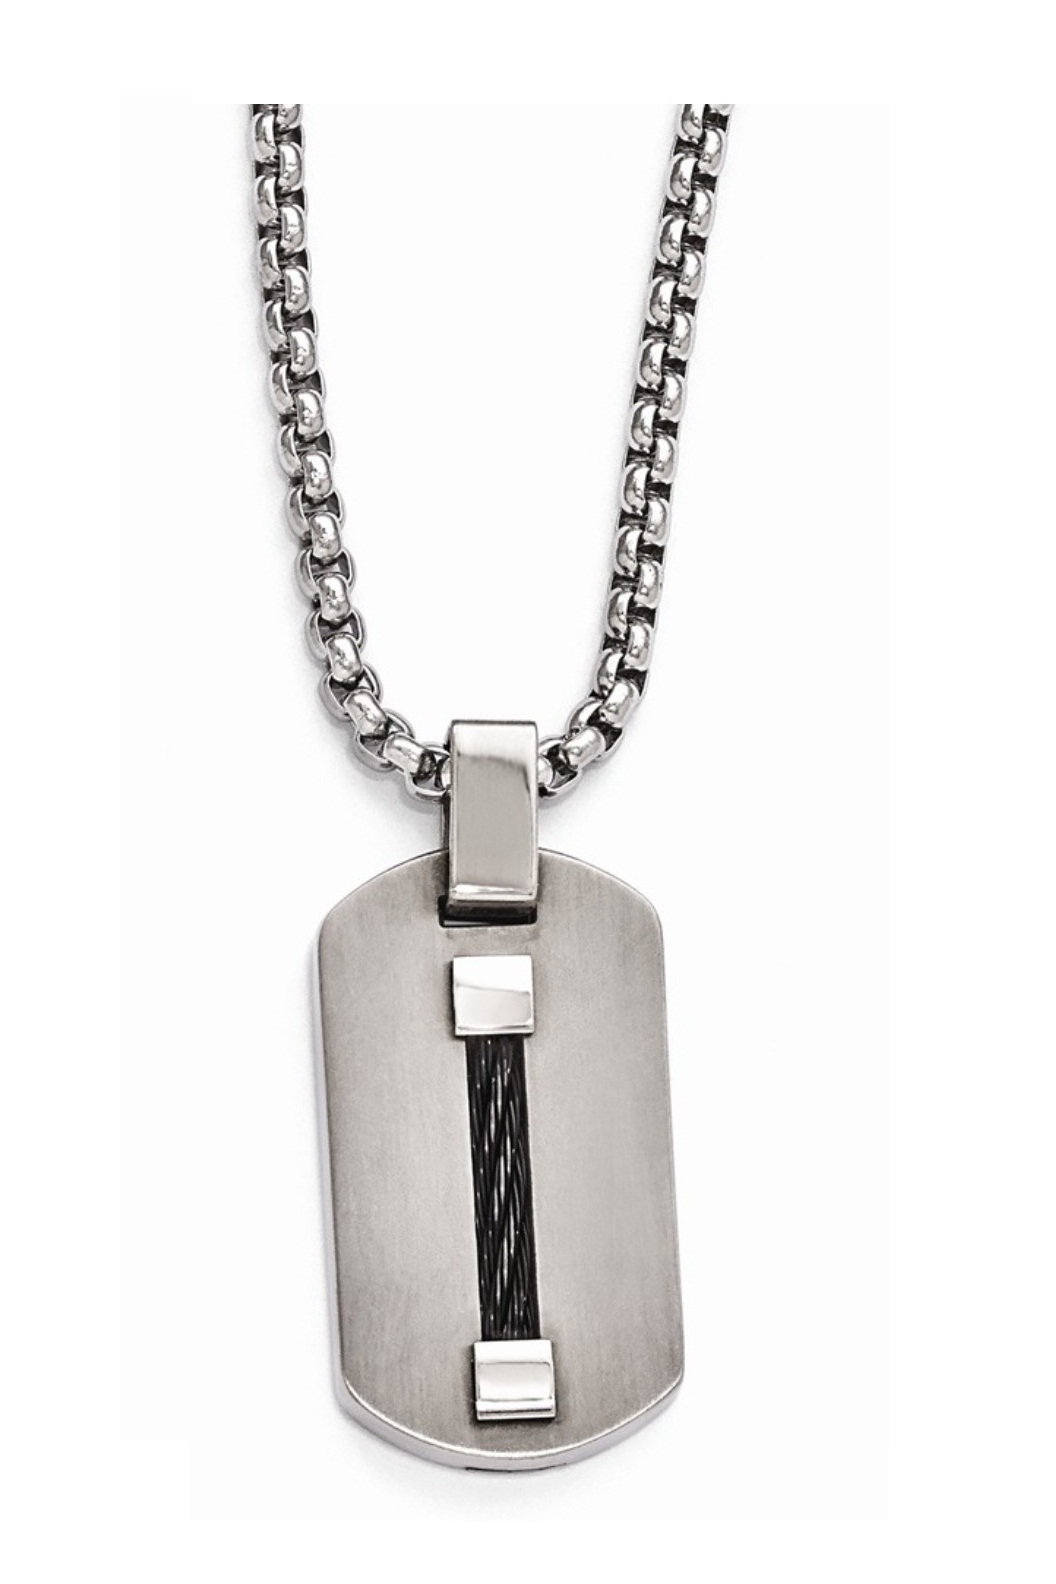  Polished and Brushed Titanium Dog Tag and Cable Pendant Necklace, 20